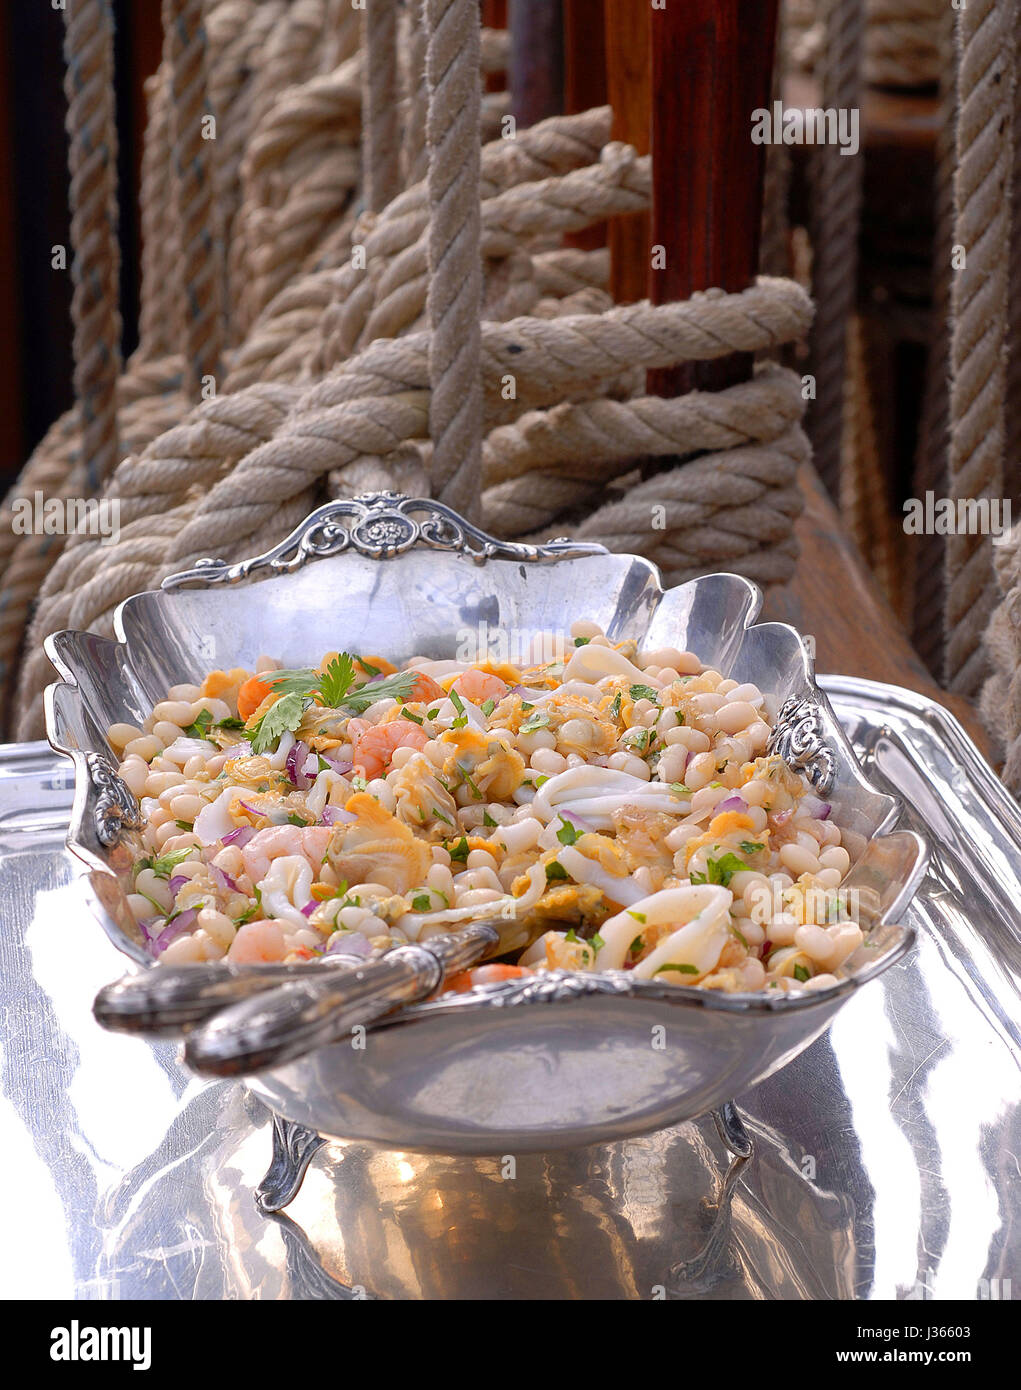 June, welcome on board with the 'Yachting' menu: cranberry bean salad with seafood Stock Photo